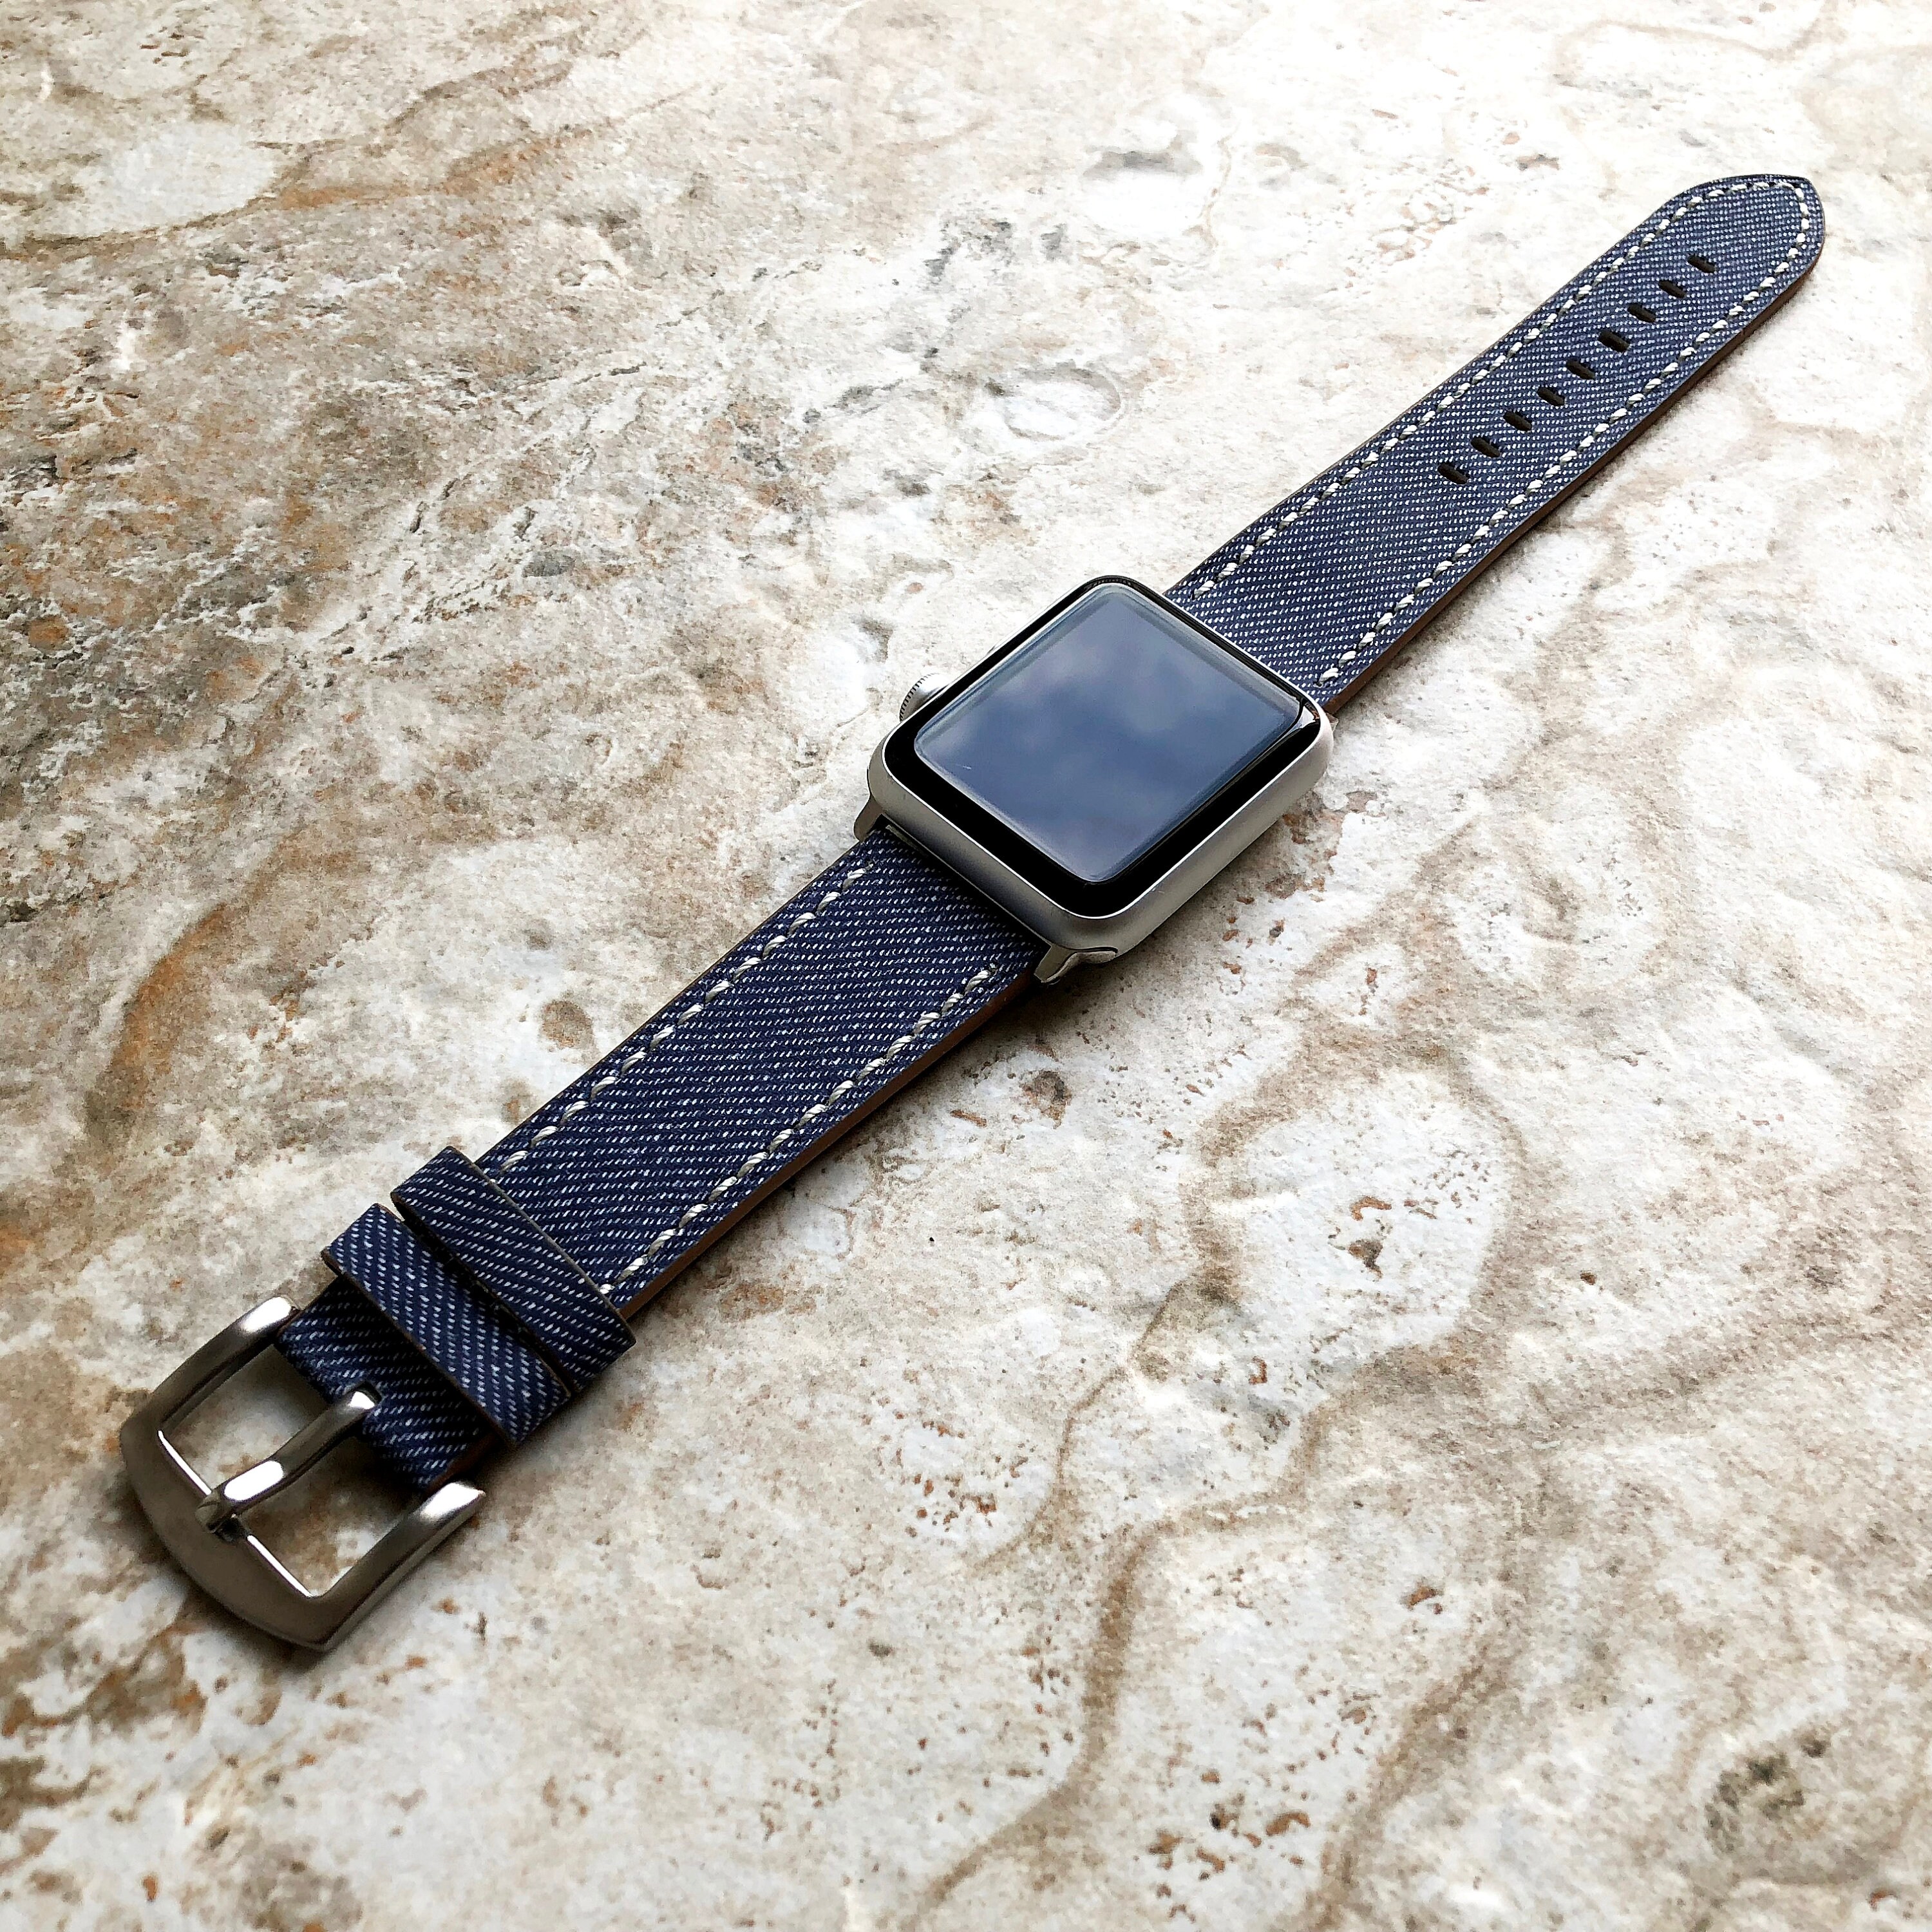 All Soft Strap Etsy 38mm 49mm for Jeans Iwatch Online Band India Highly 41mm in - 44mm Leather Resistance AP-JB3 Print 42mm 40mm Buy Coated 45mm Apple Series Case